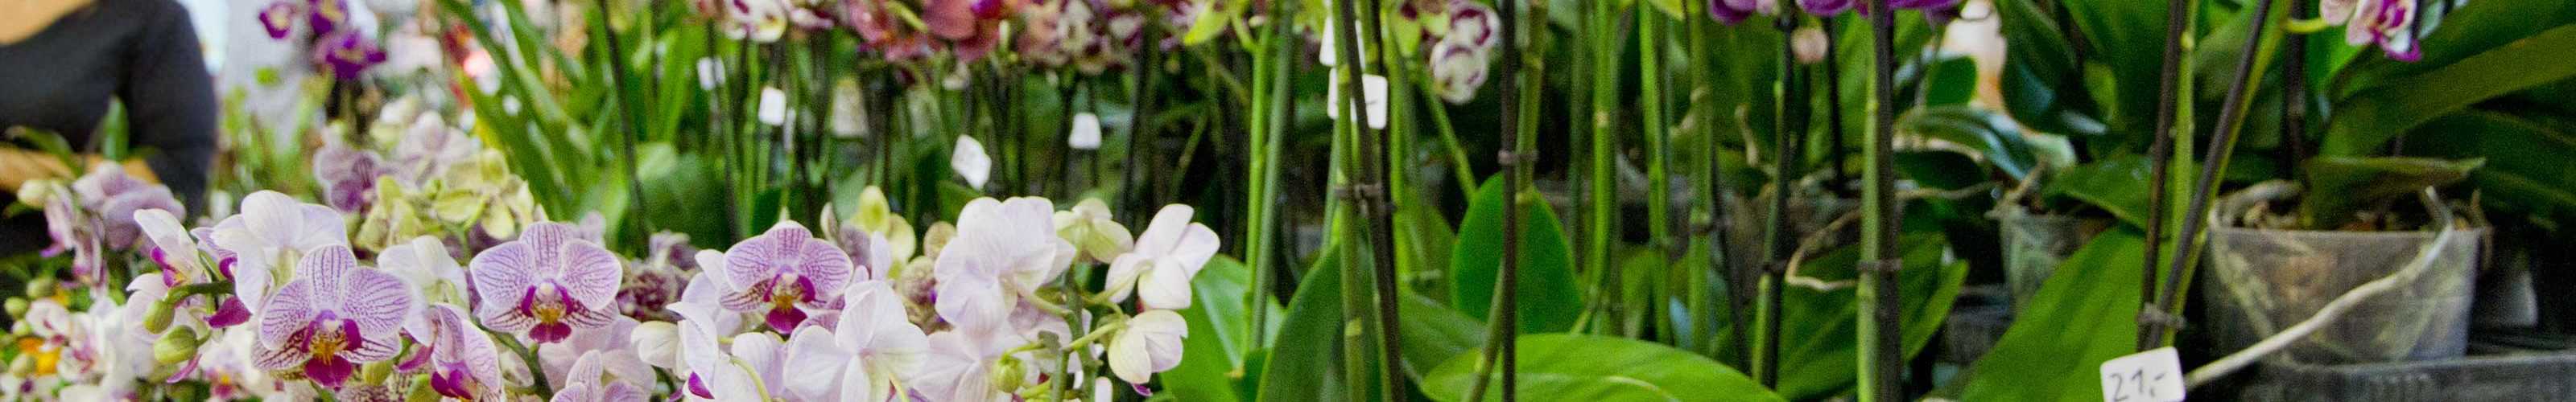 How to Grow an Orchid? – The Housing Forum